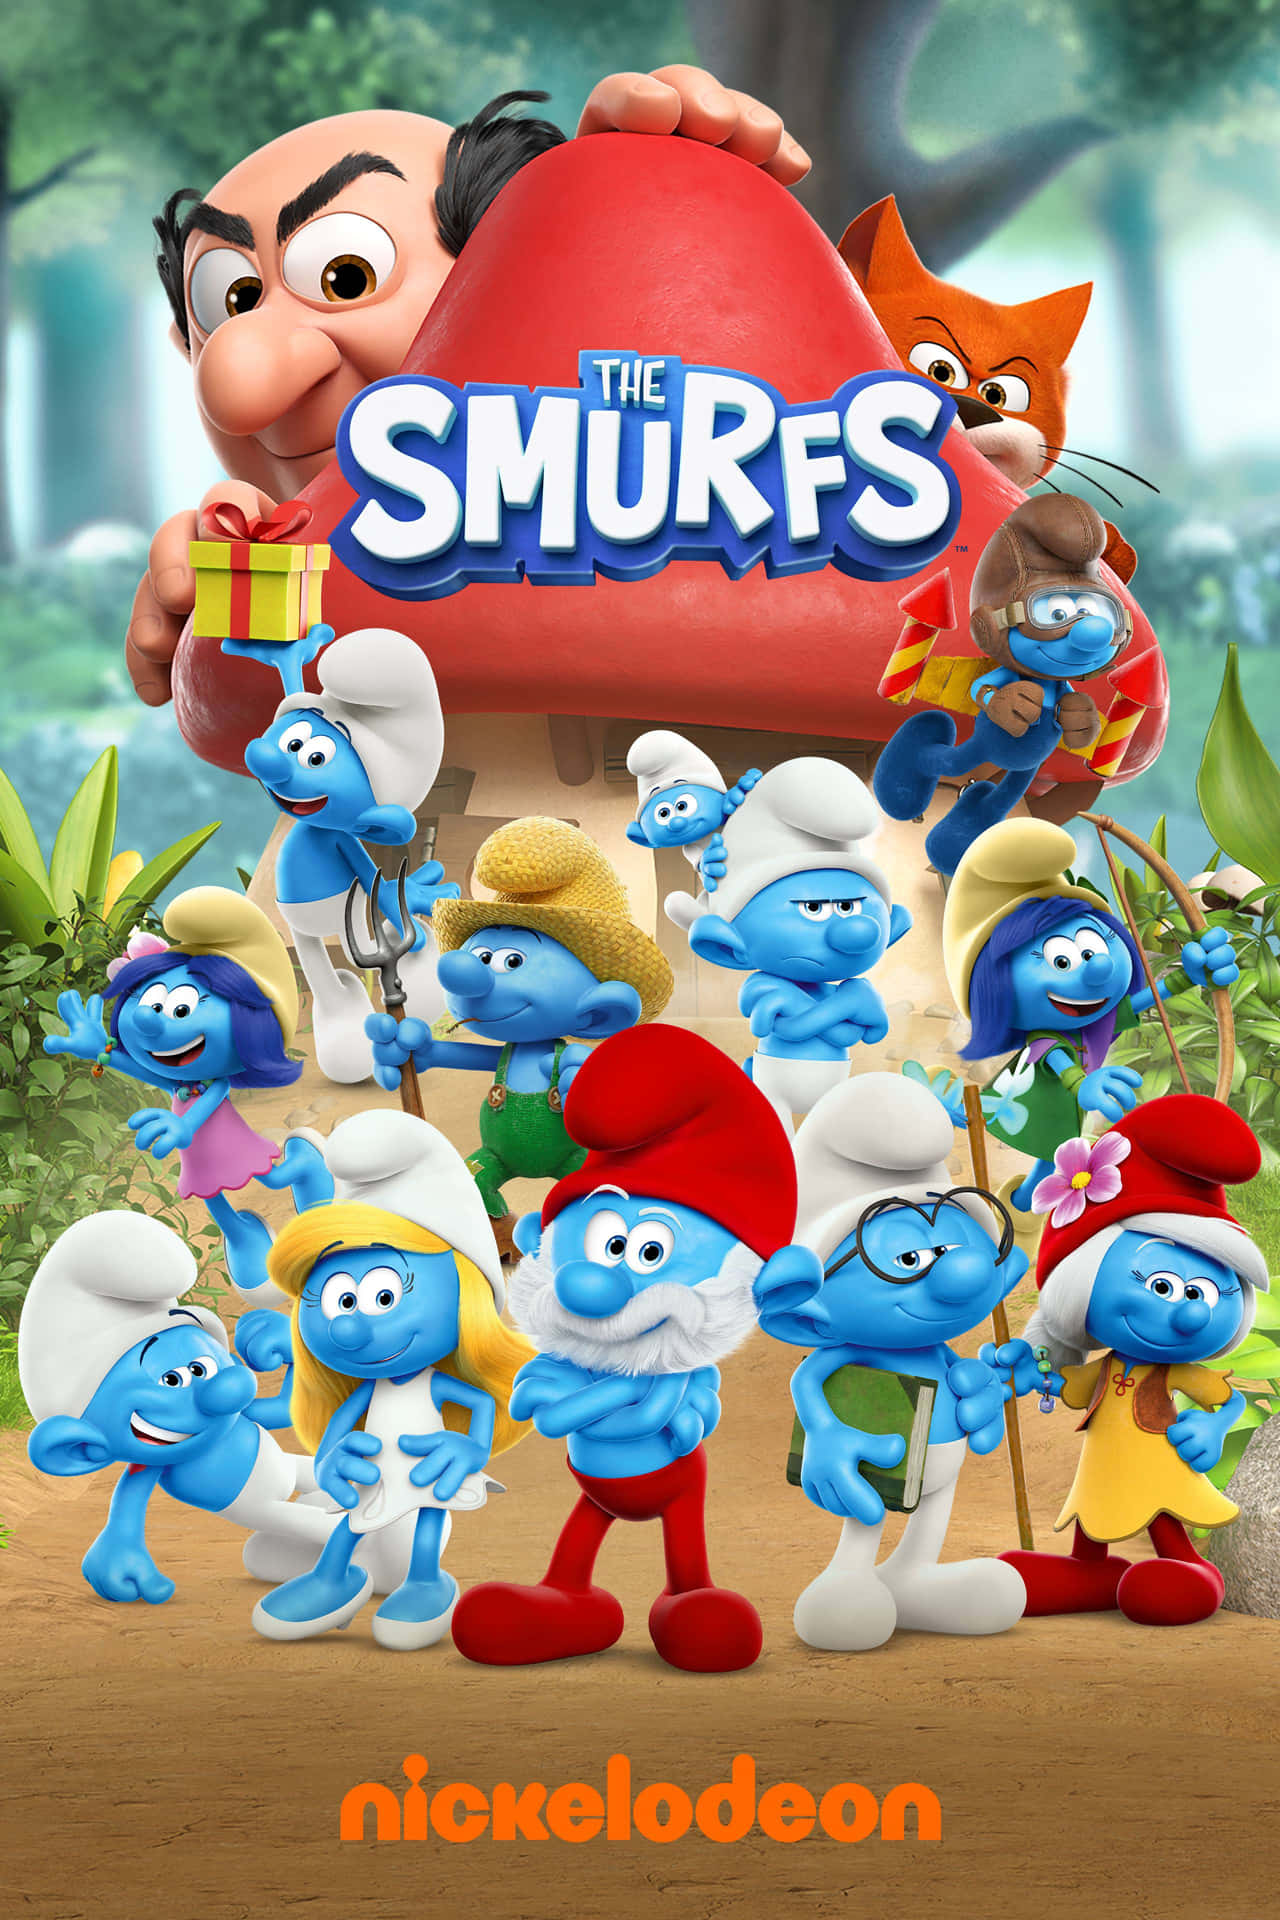 The Smurfs are getting ready to embark on their next adventure!